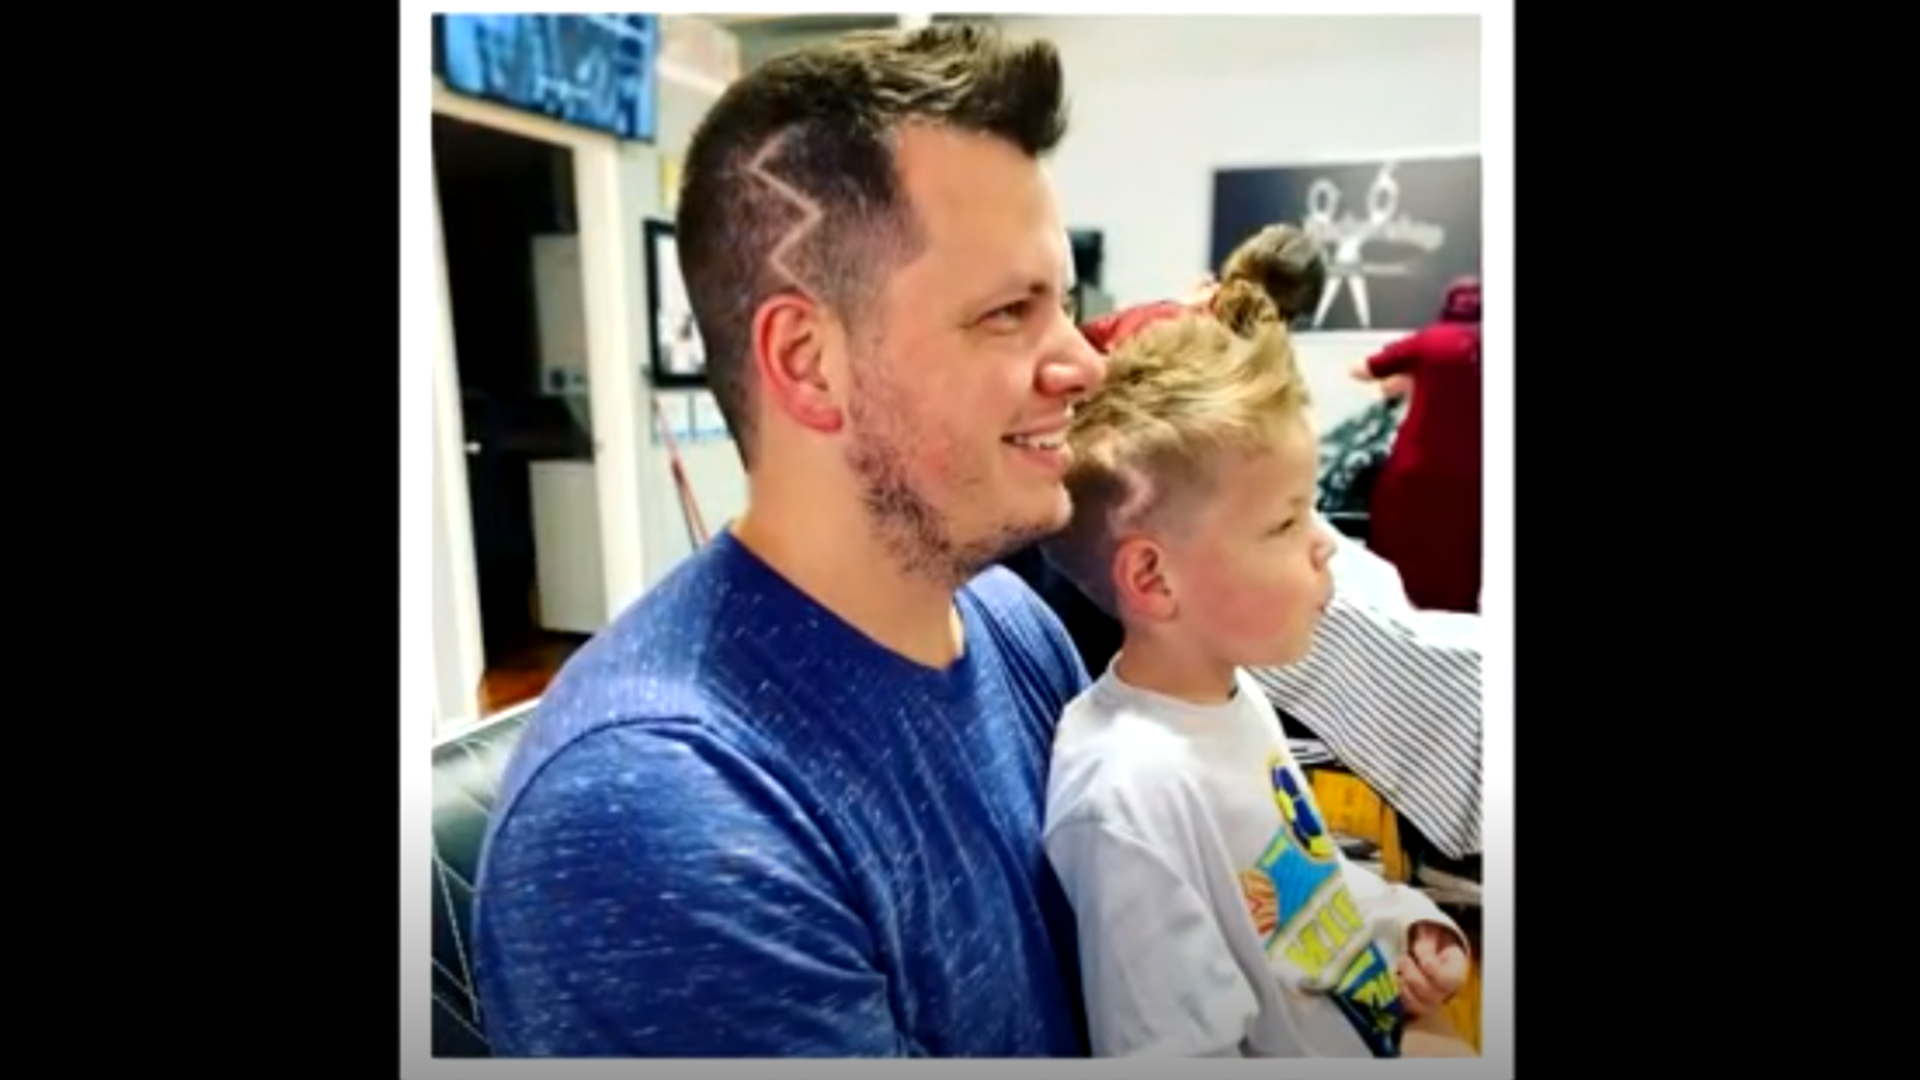 Five-year-old Hunter Tynes felt self-conscious about his surgery scars, so his dad got a special haircut to match.